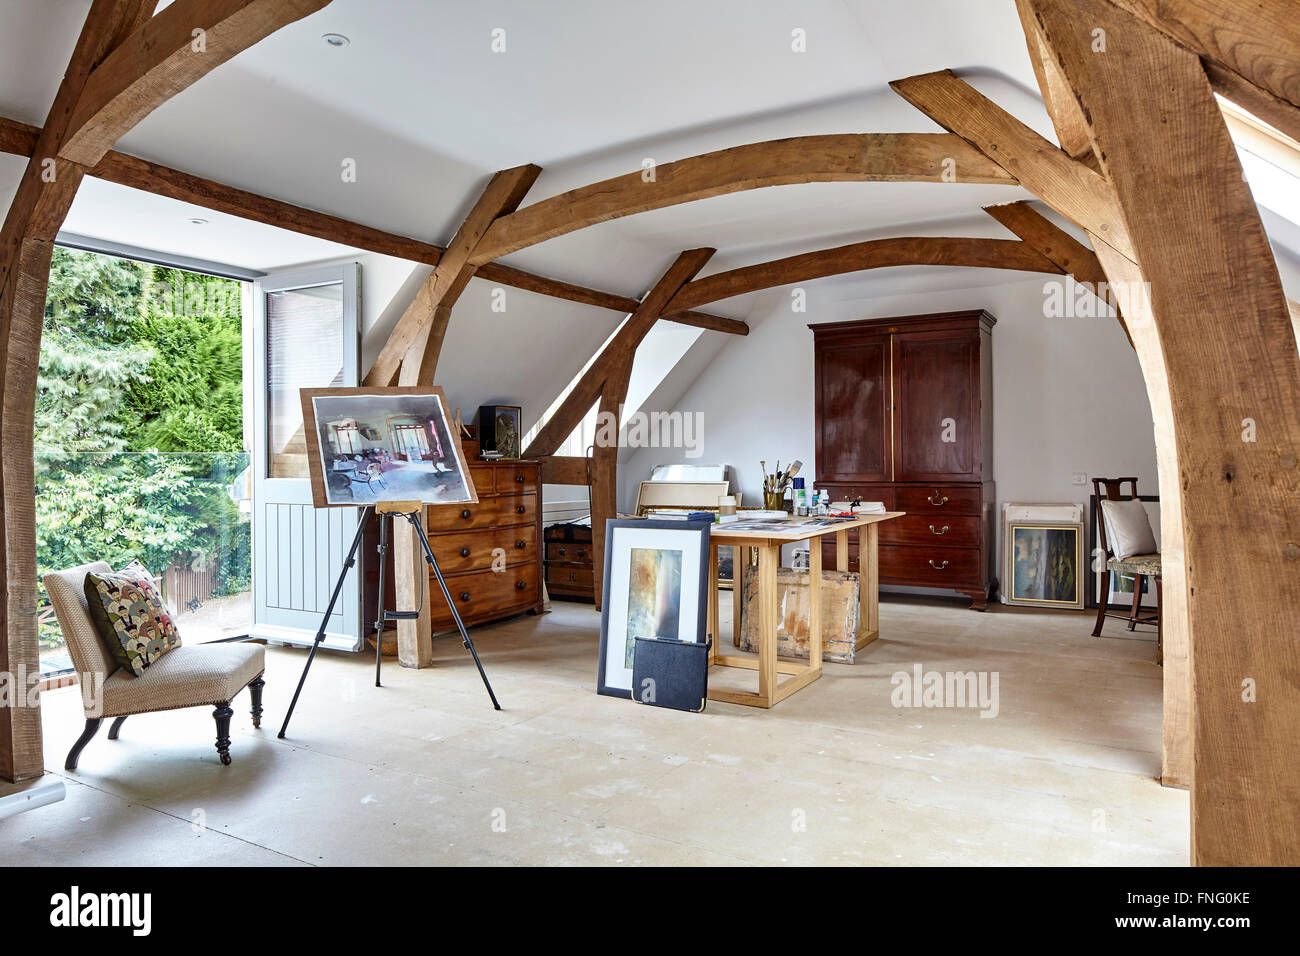 First Floor Studio With Exposed Wood Beams Semi Vaulted Ceiling